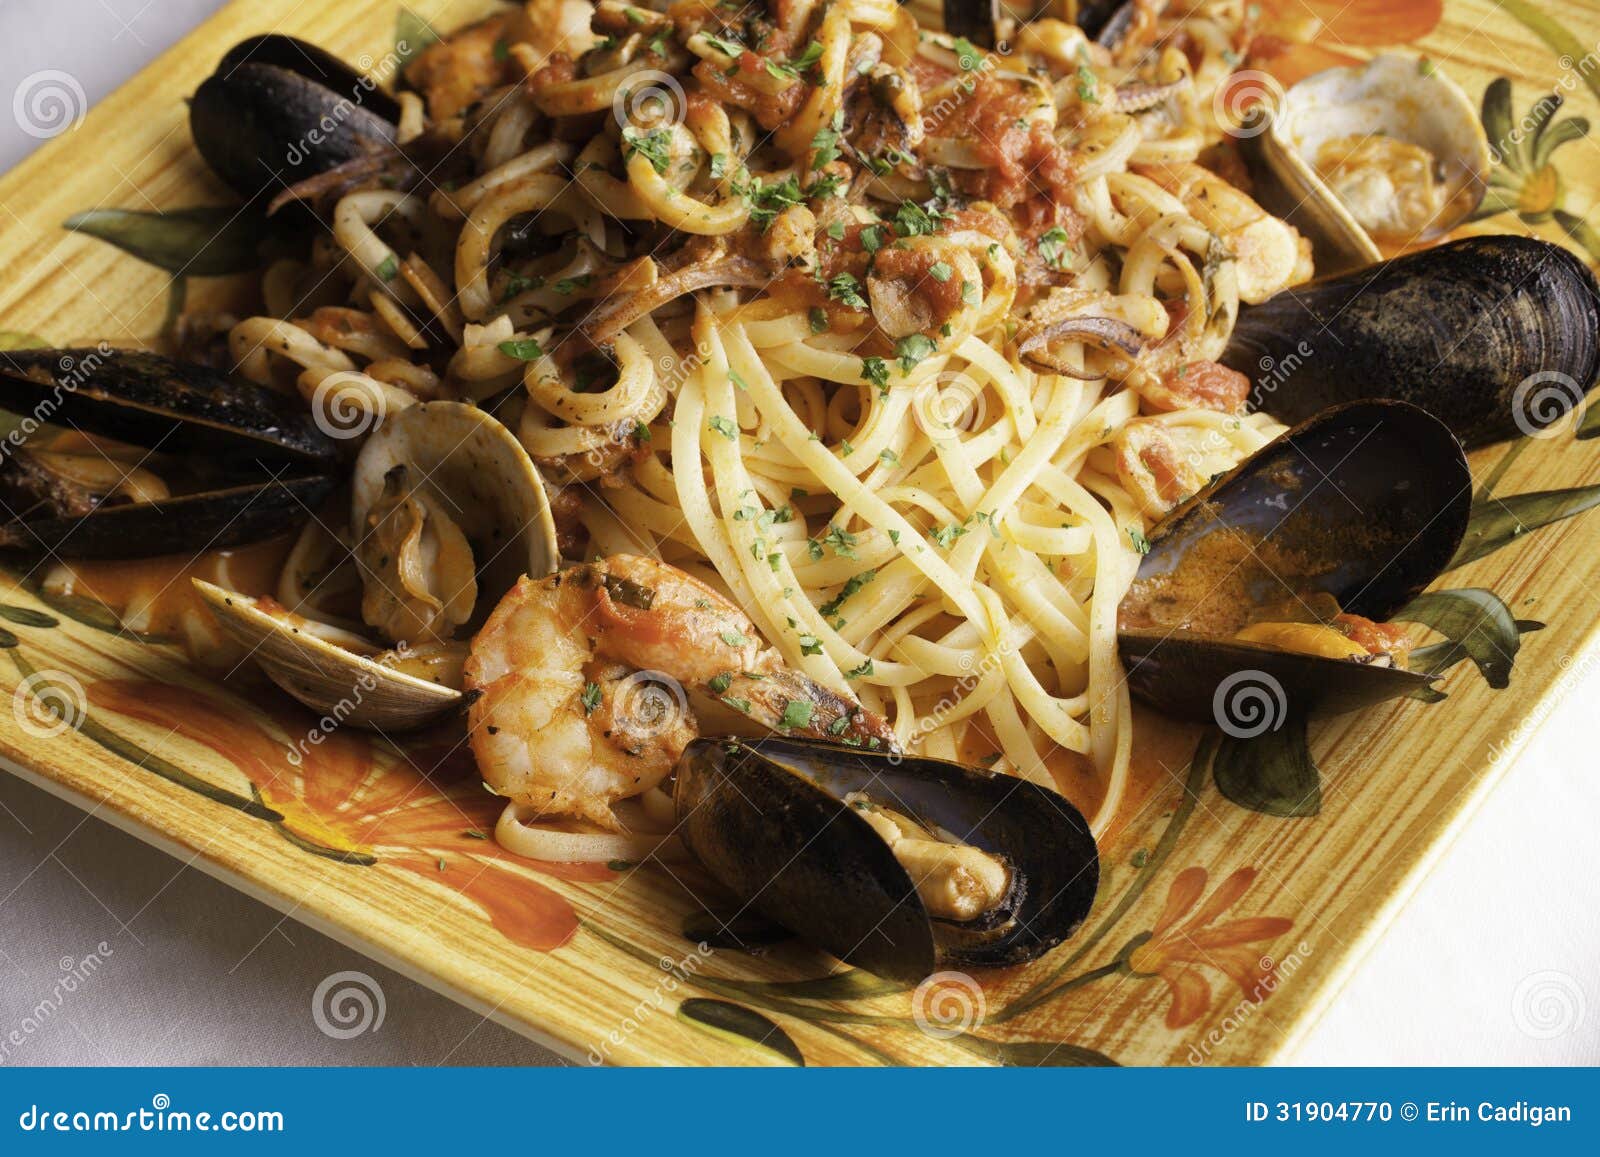 seafood fra diavolo with linguine